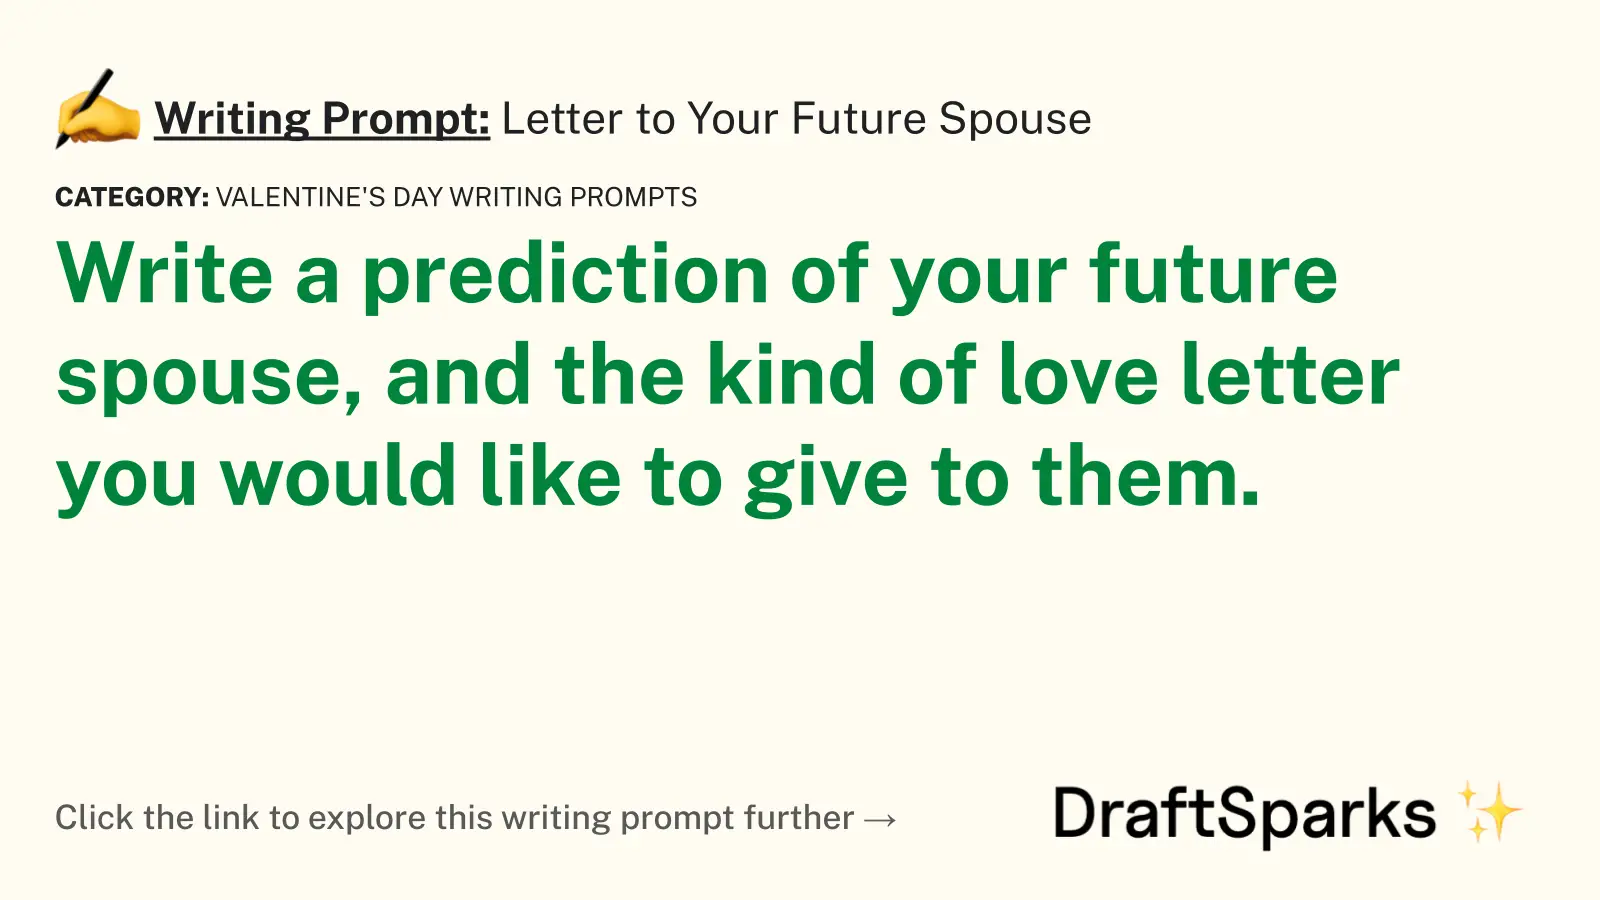 Letter to Your Future Spouse